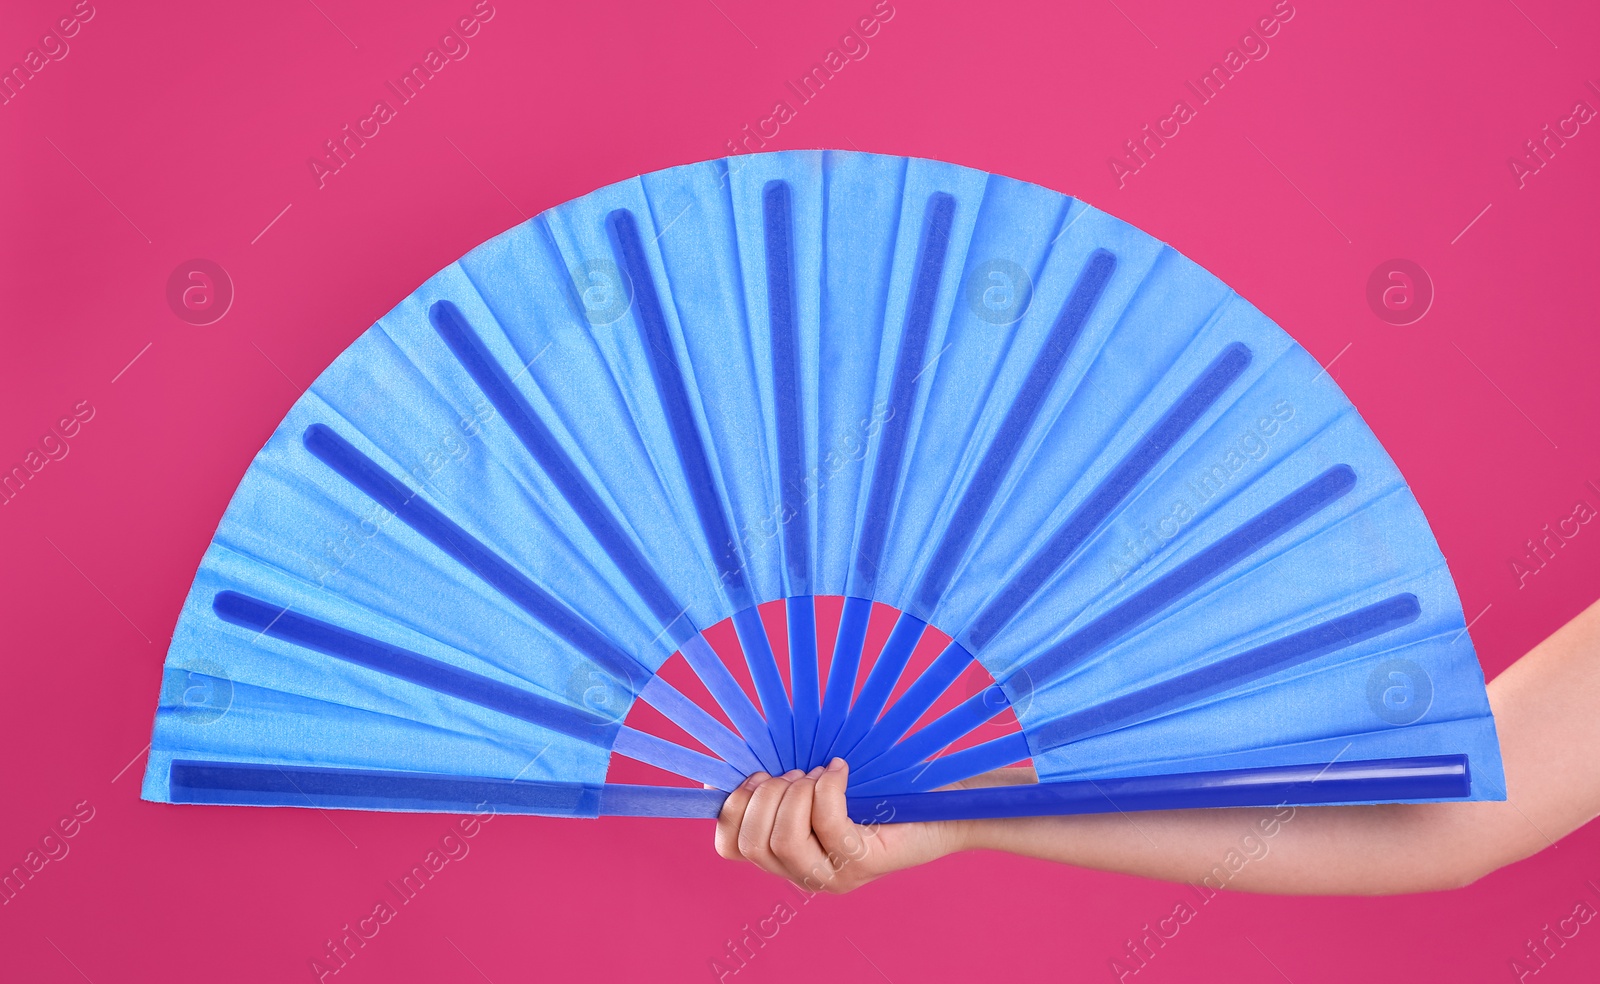 Photo of Woman holding blue hand fan on pink background, closeup